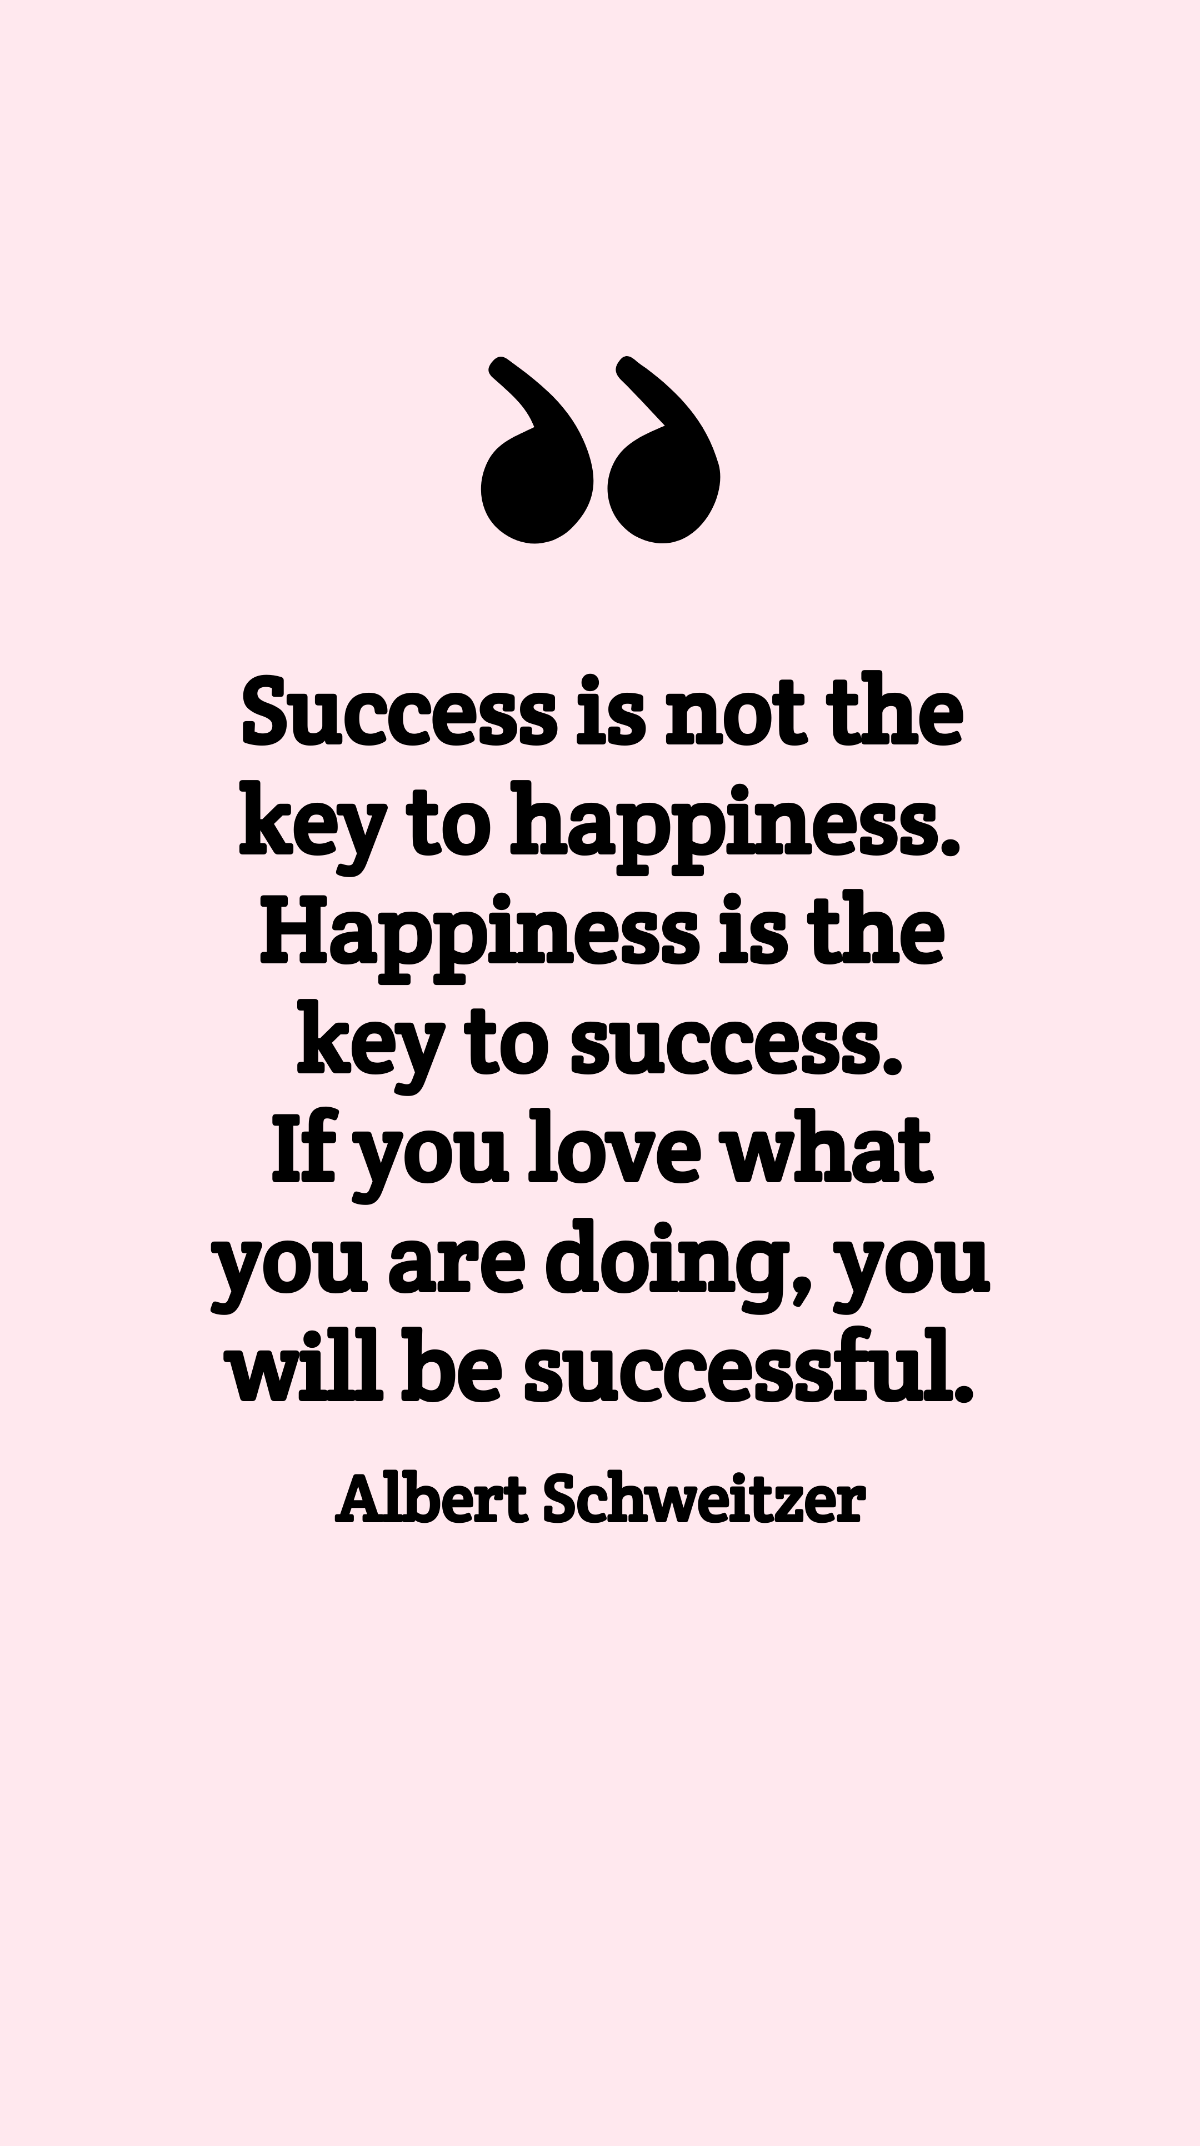 Albert Schweitzer - Success is not the key to happiness. Happiness is the key to success. If you love what you are doing, you will be successful. Template